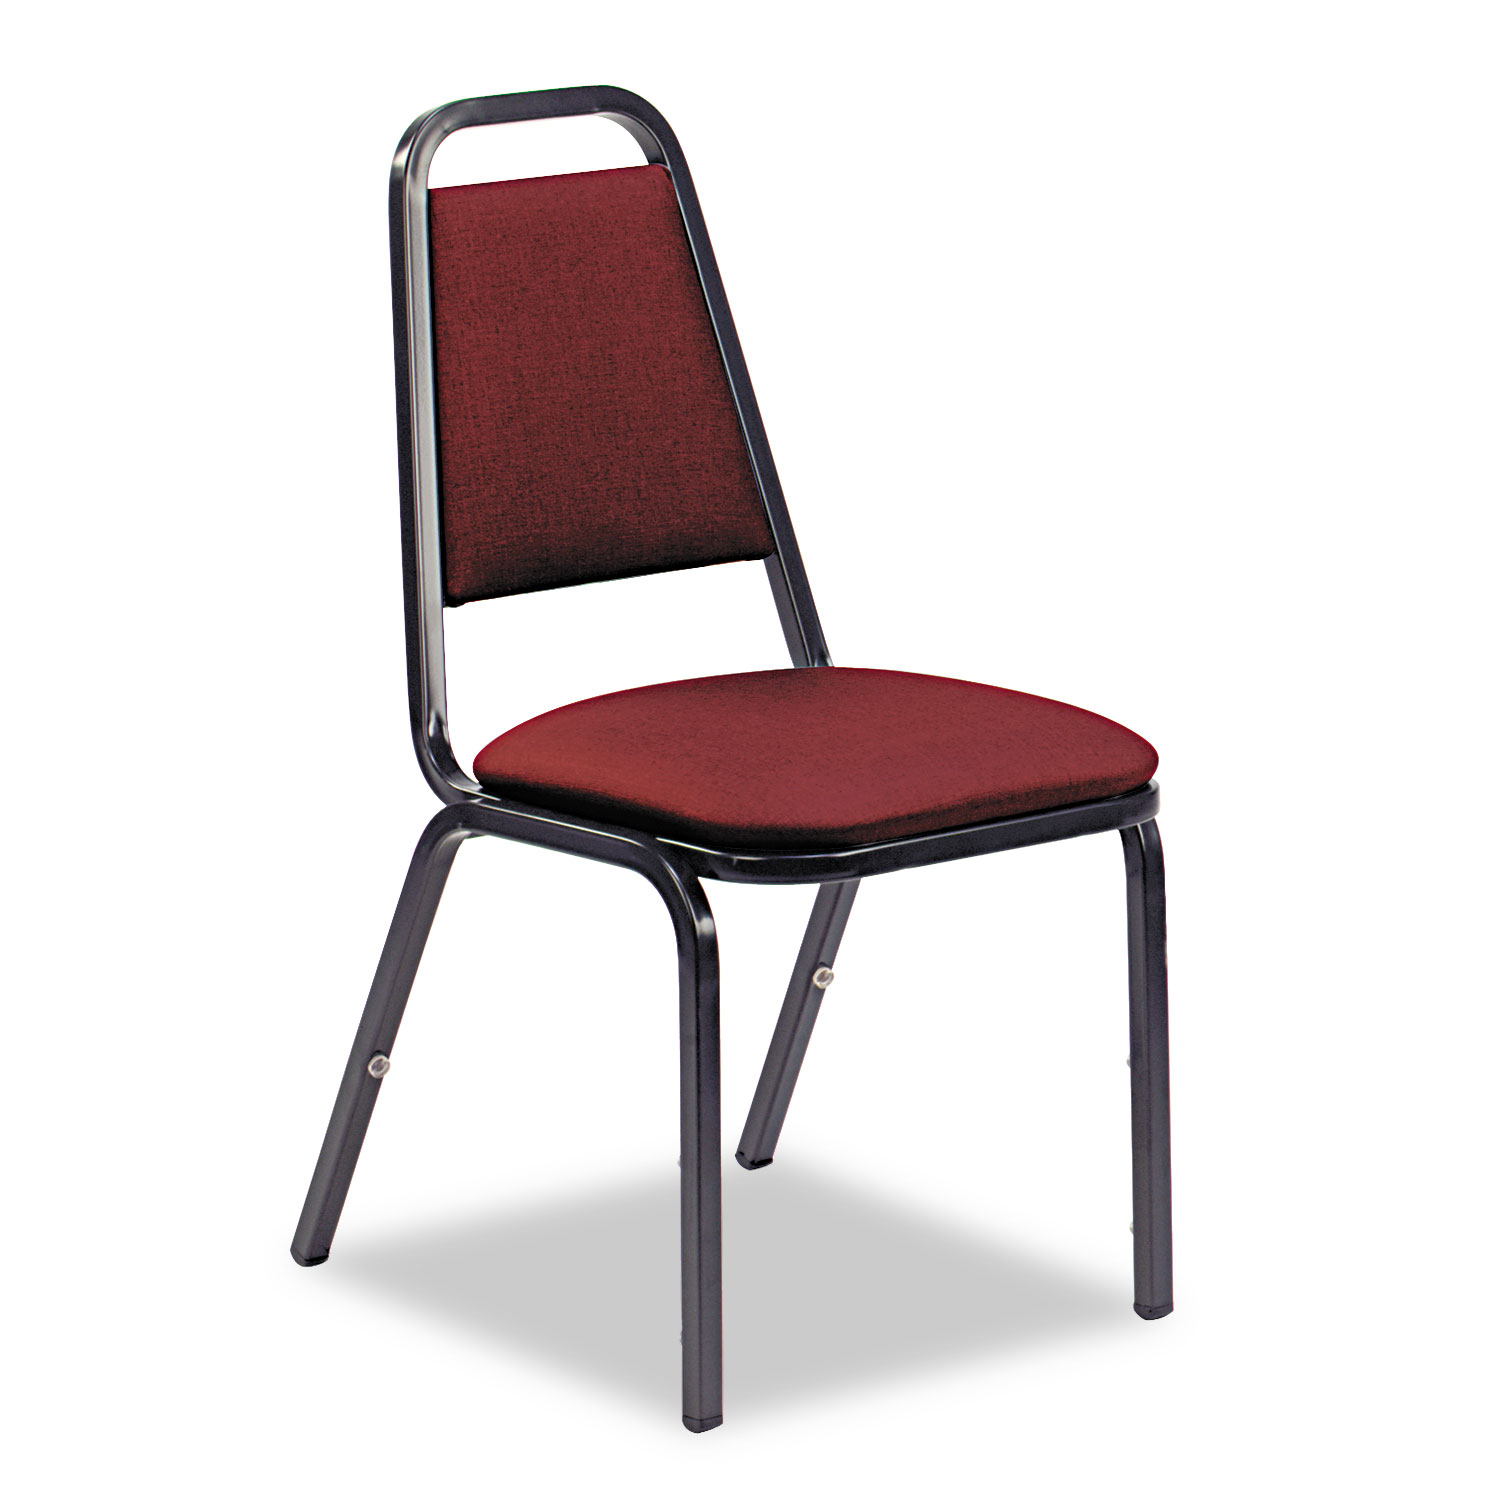 8926 Series Vinyl Upholstered Stack Chair, 18w x 22d x 34-1/2h, Wine/Black, 4/CT